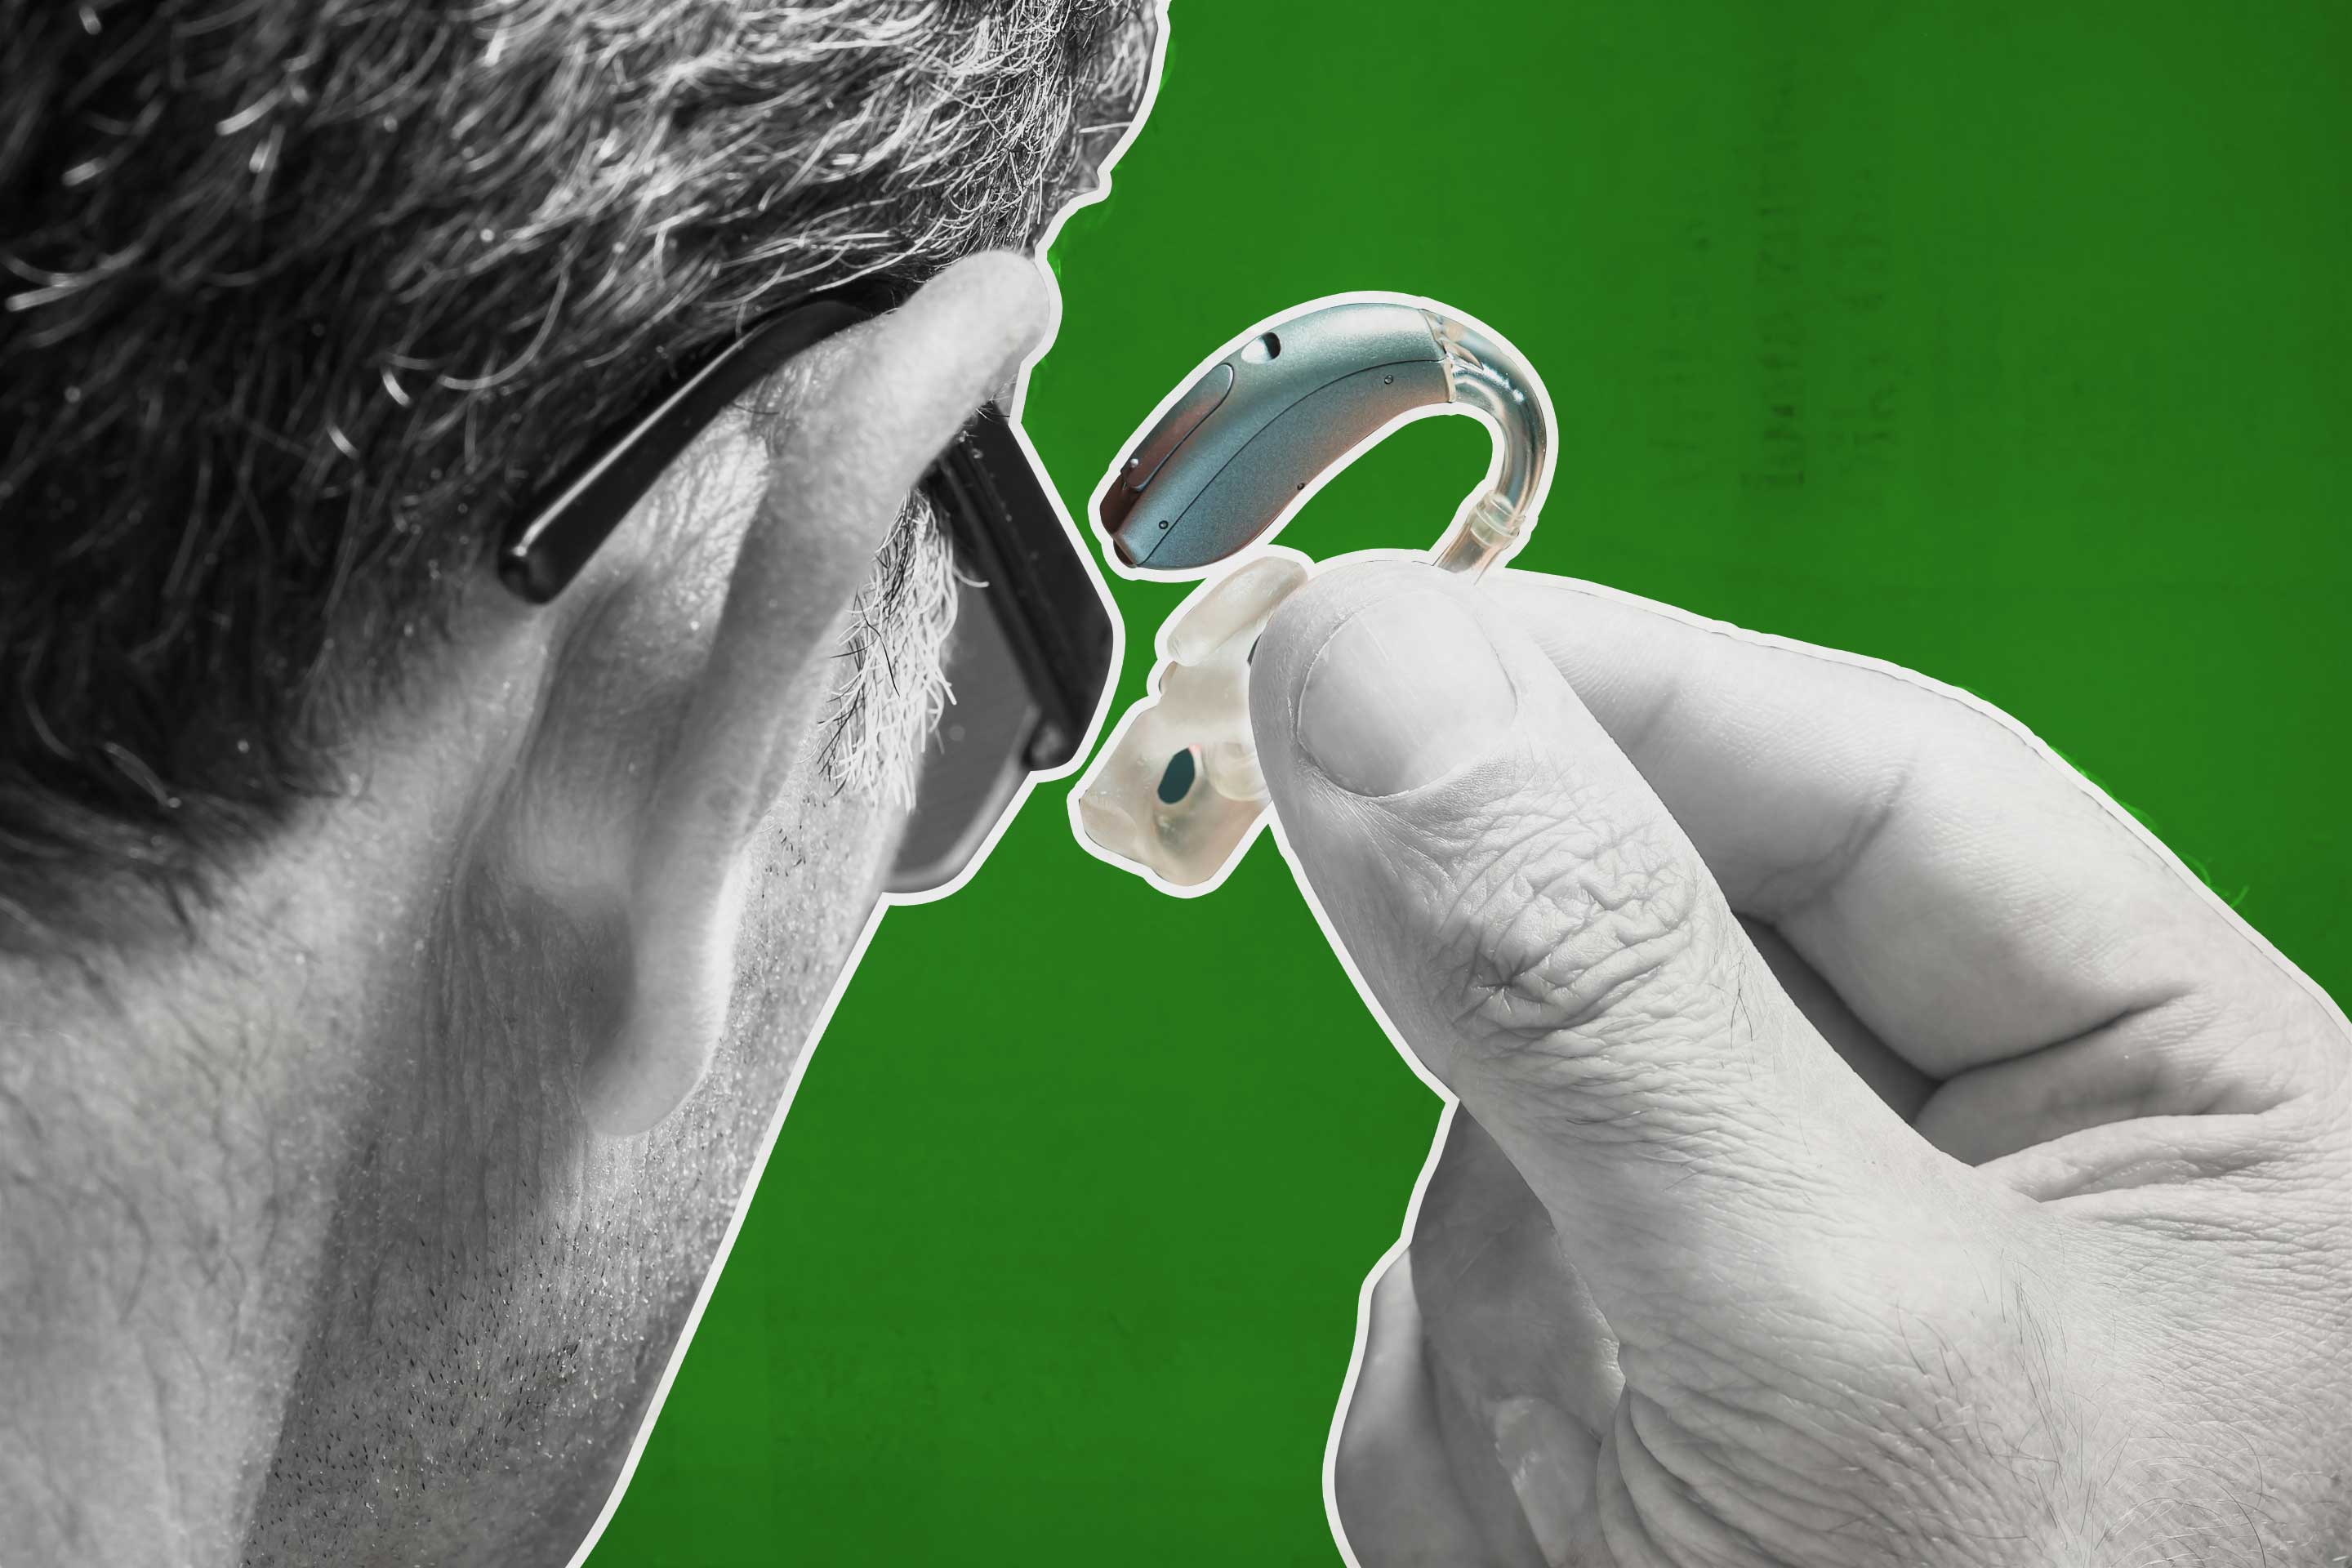 Invest in your health and wellness with personalized hearing care